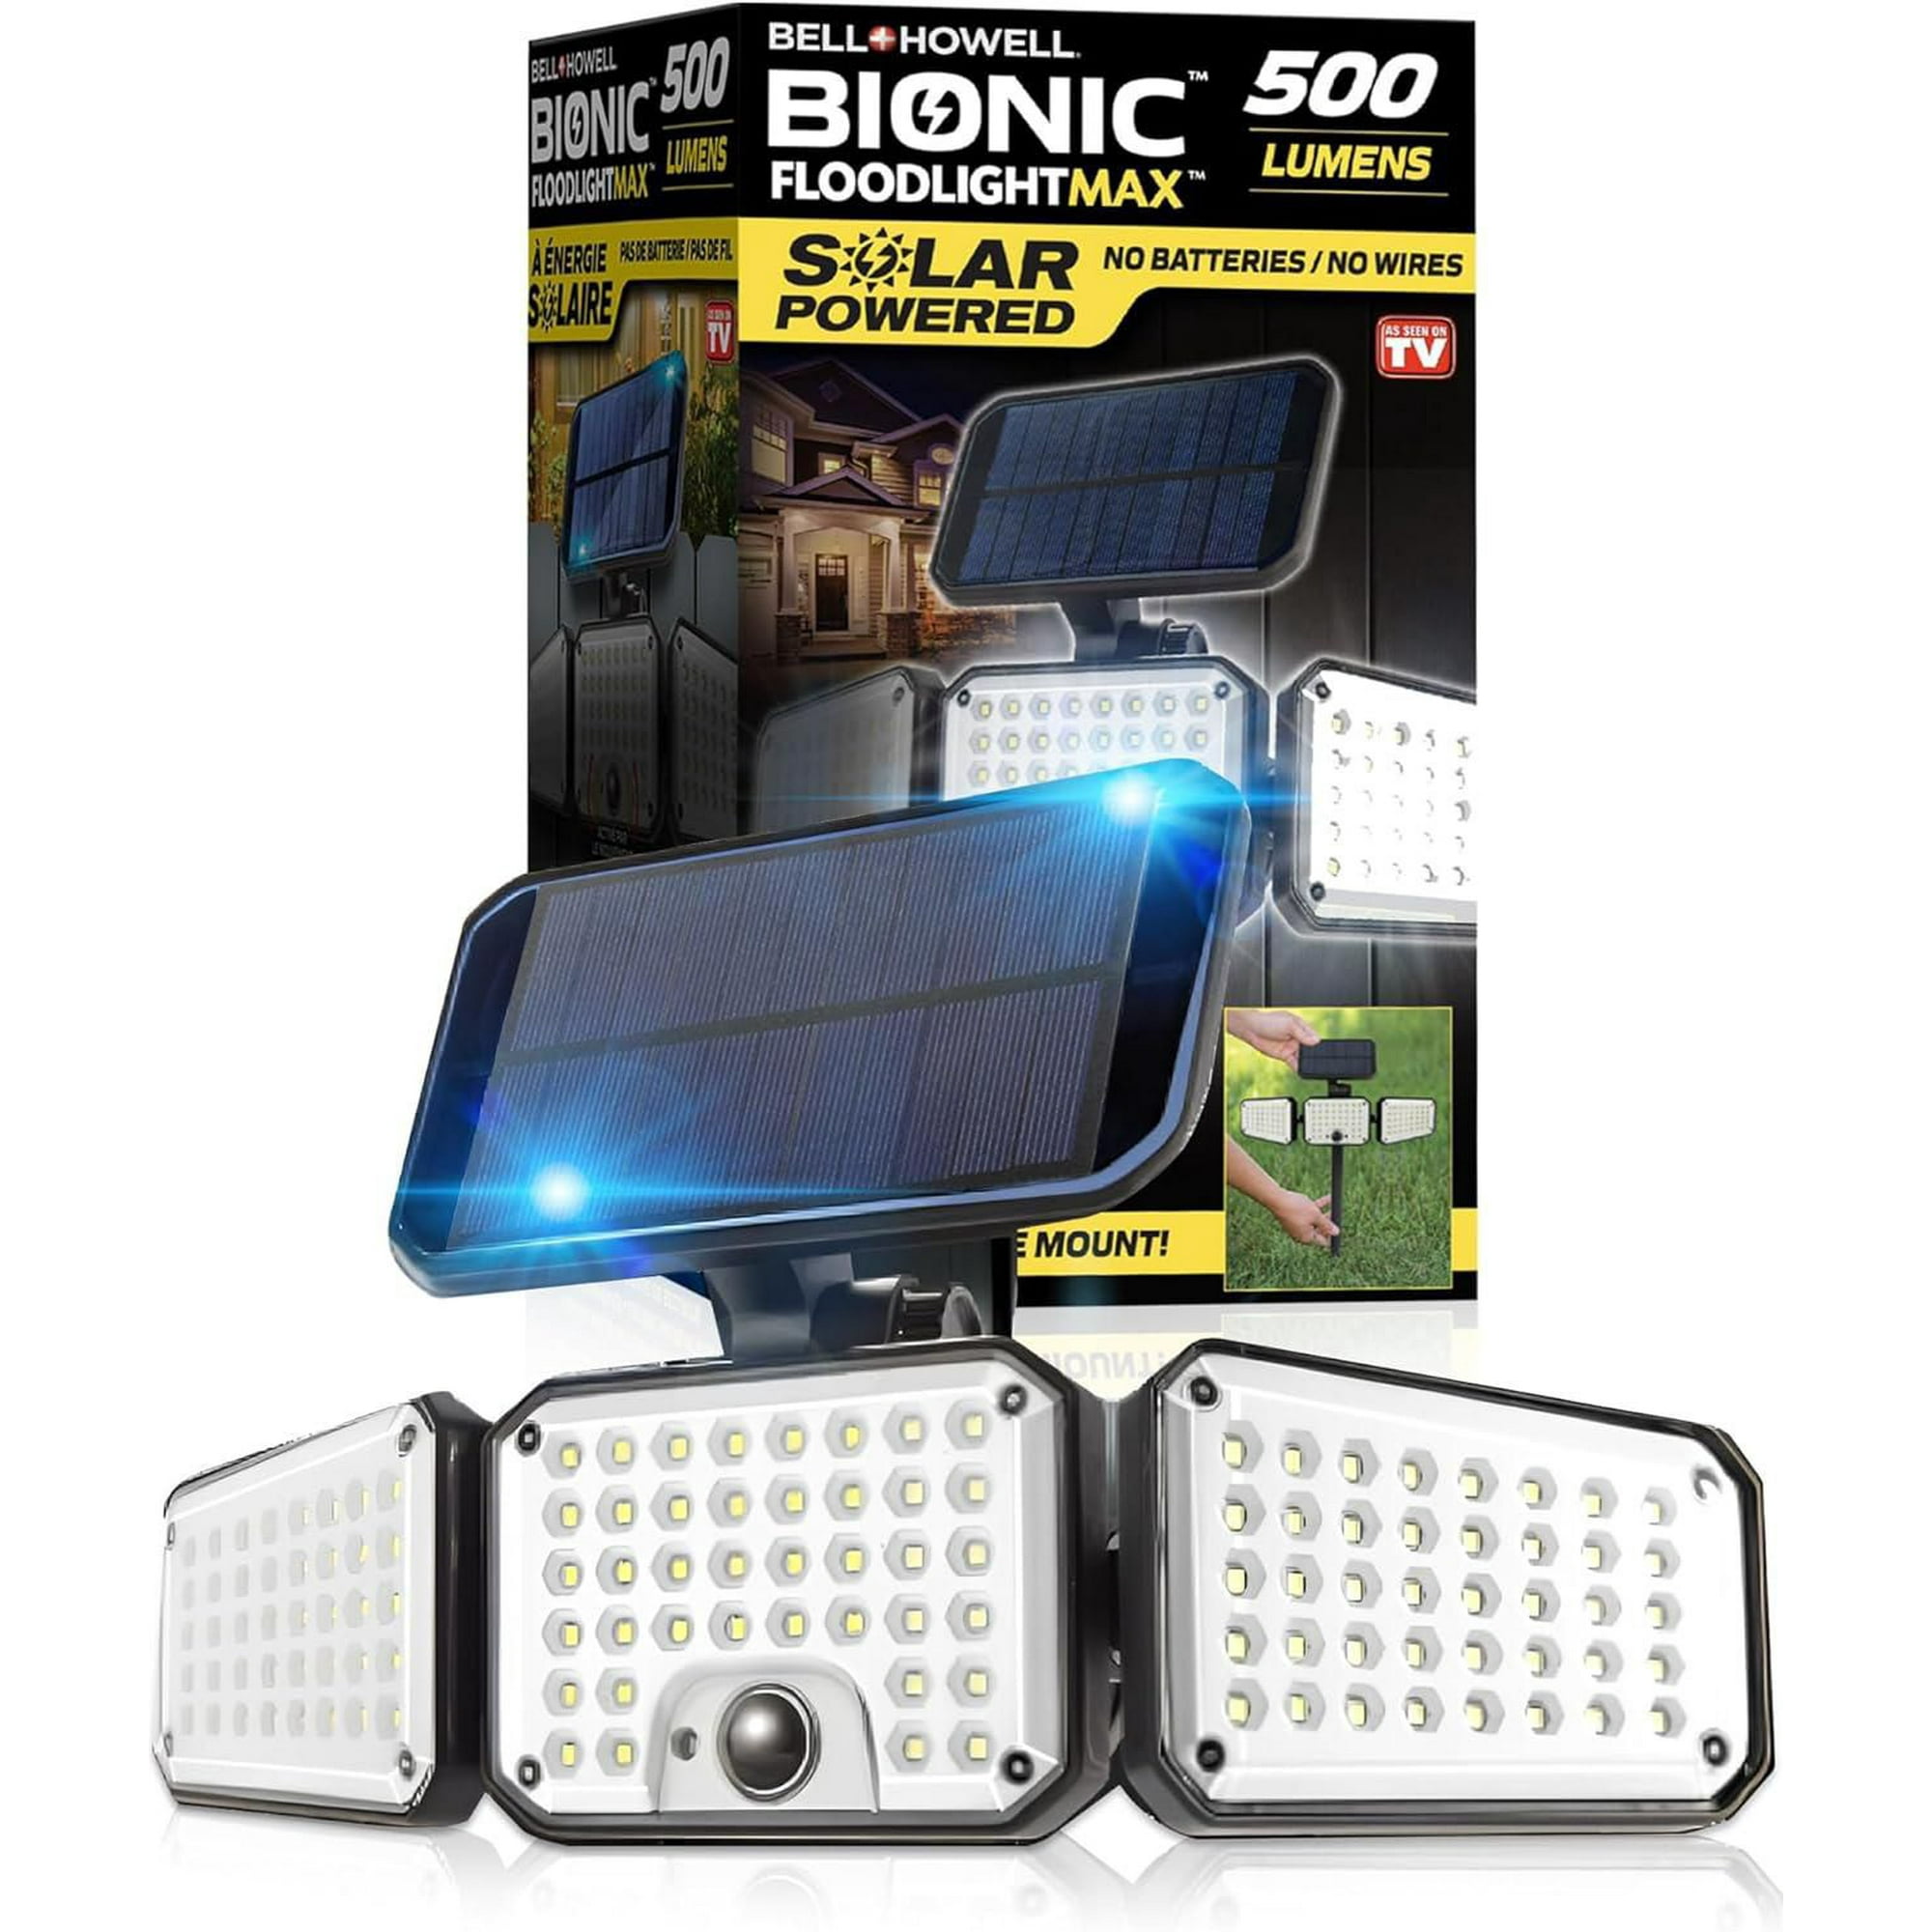 Bell and Howell Bionic Floodlight Max Solar Powered 500 Lumens Light 